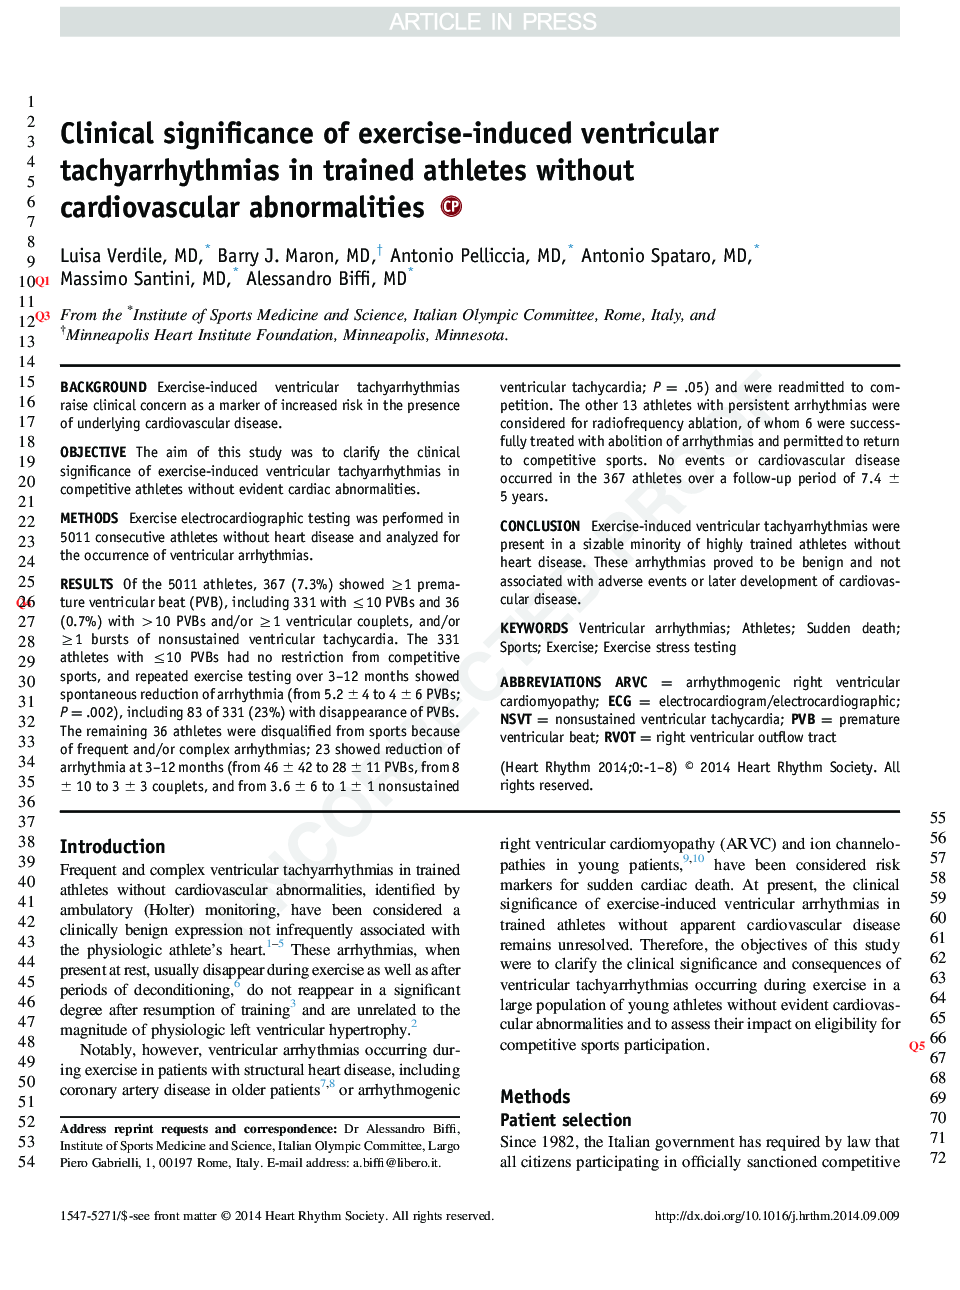 Clinical significance of exercise-induced ventricular tachyarrhythmias in trained athletes without cardiovascular abnormalities